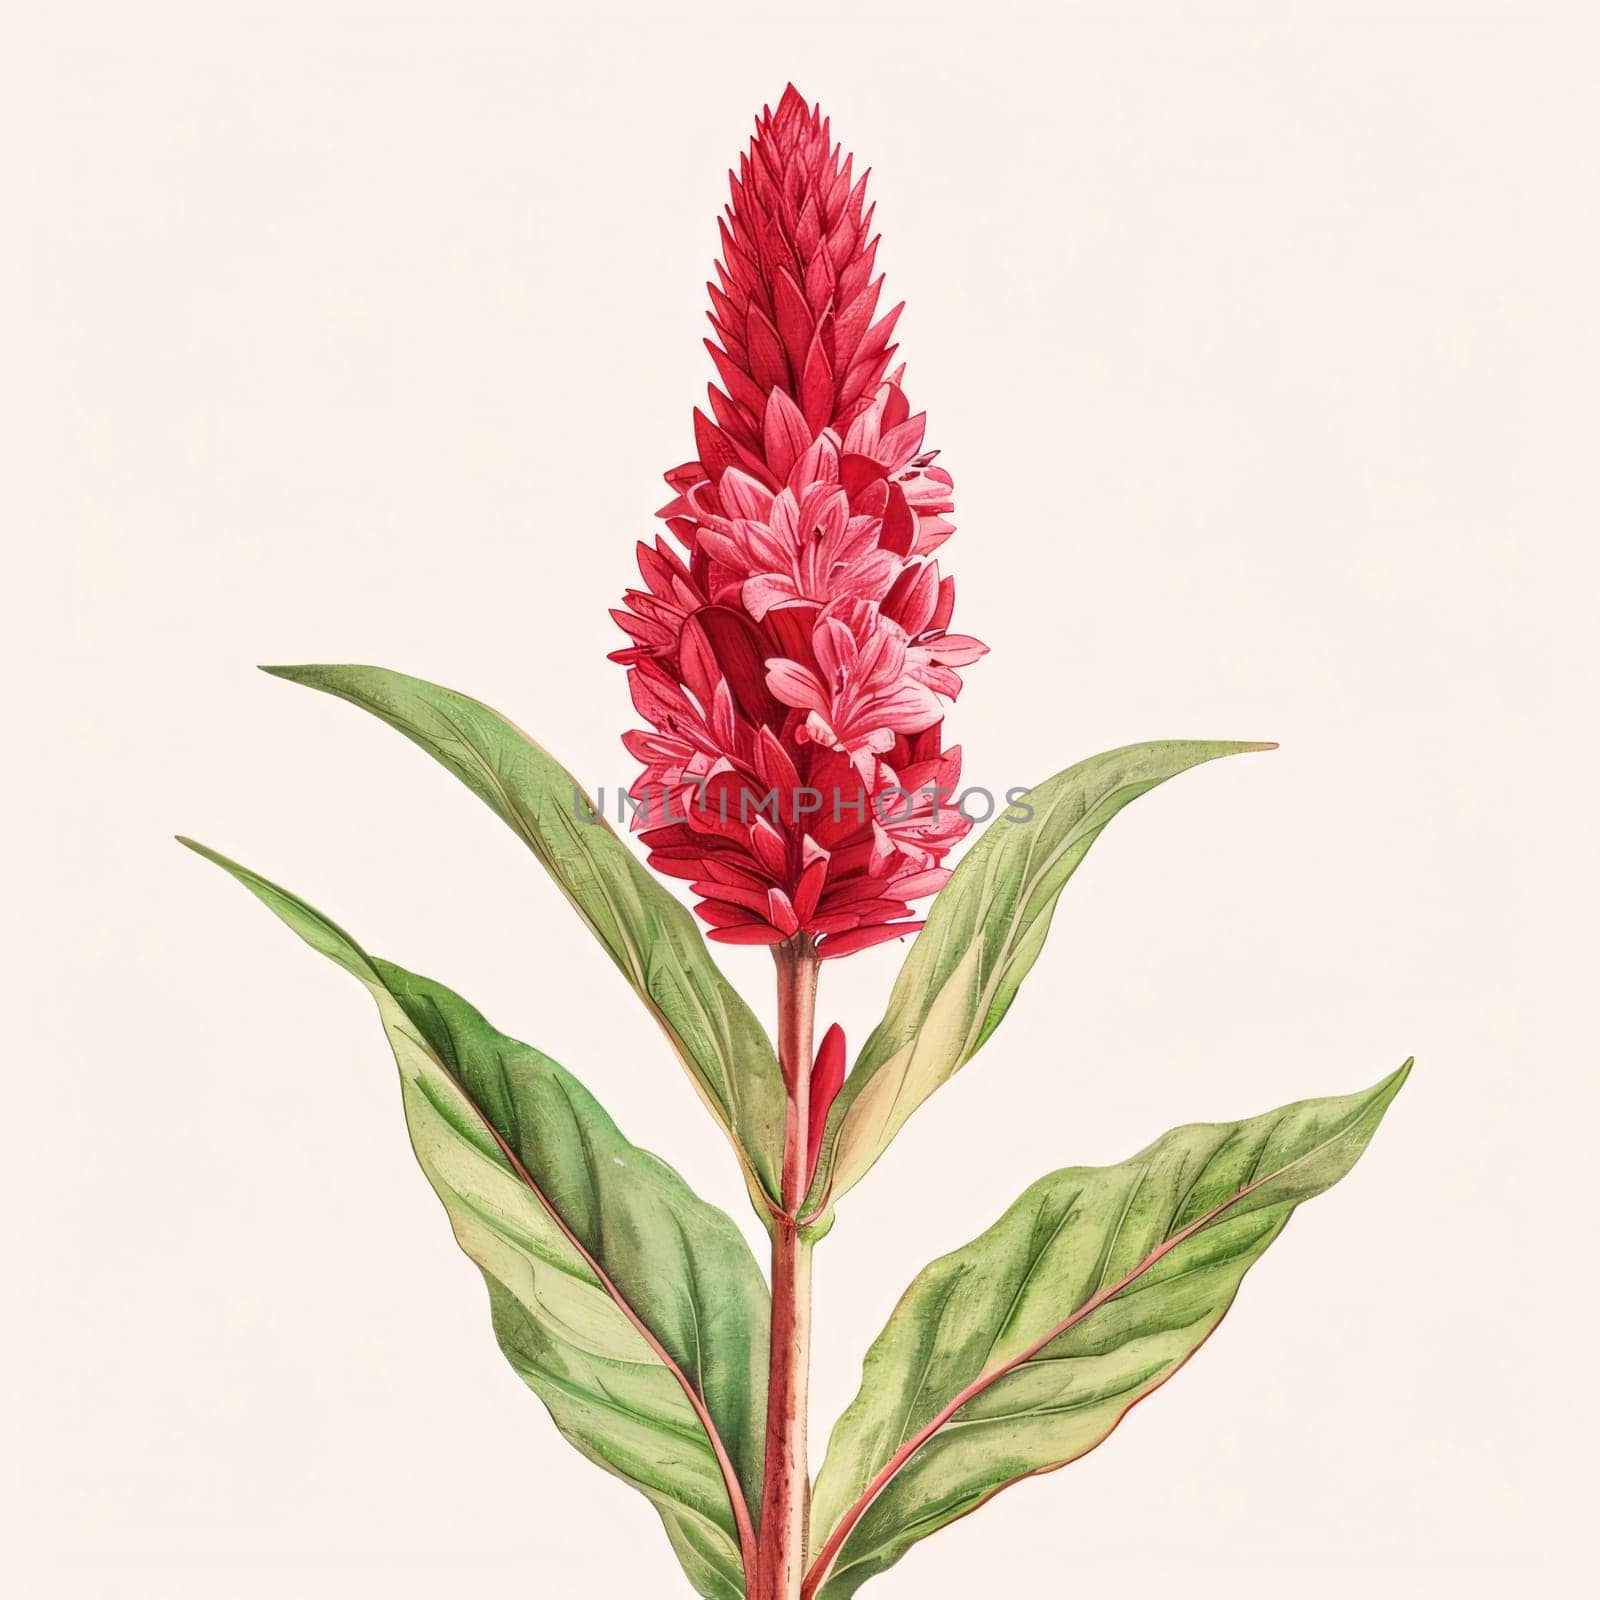 Drawn, painted flowers: red hyacinth flower with green stem and leaves. Flowering flowers, a symbol of spring, new life. A joyful time of nature waking up to life.